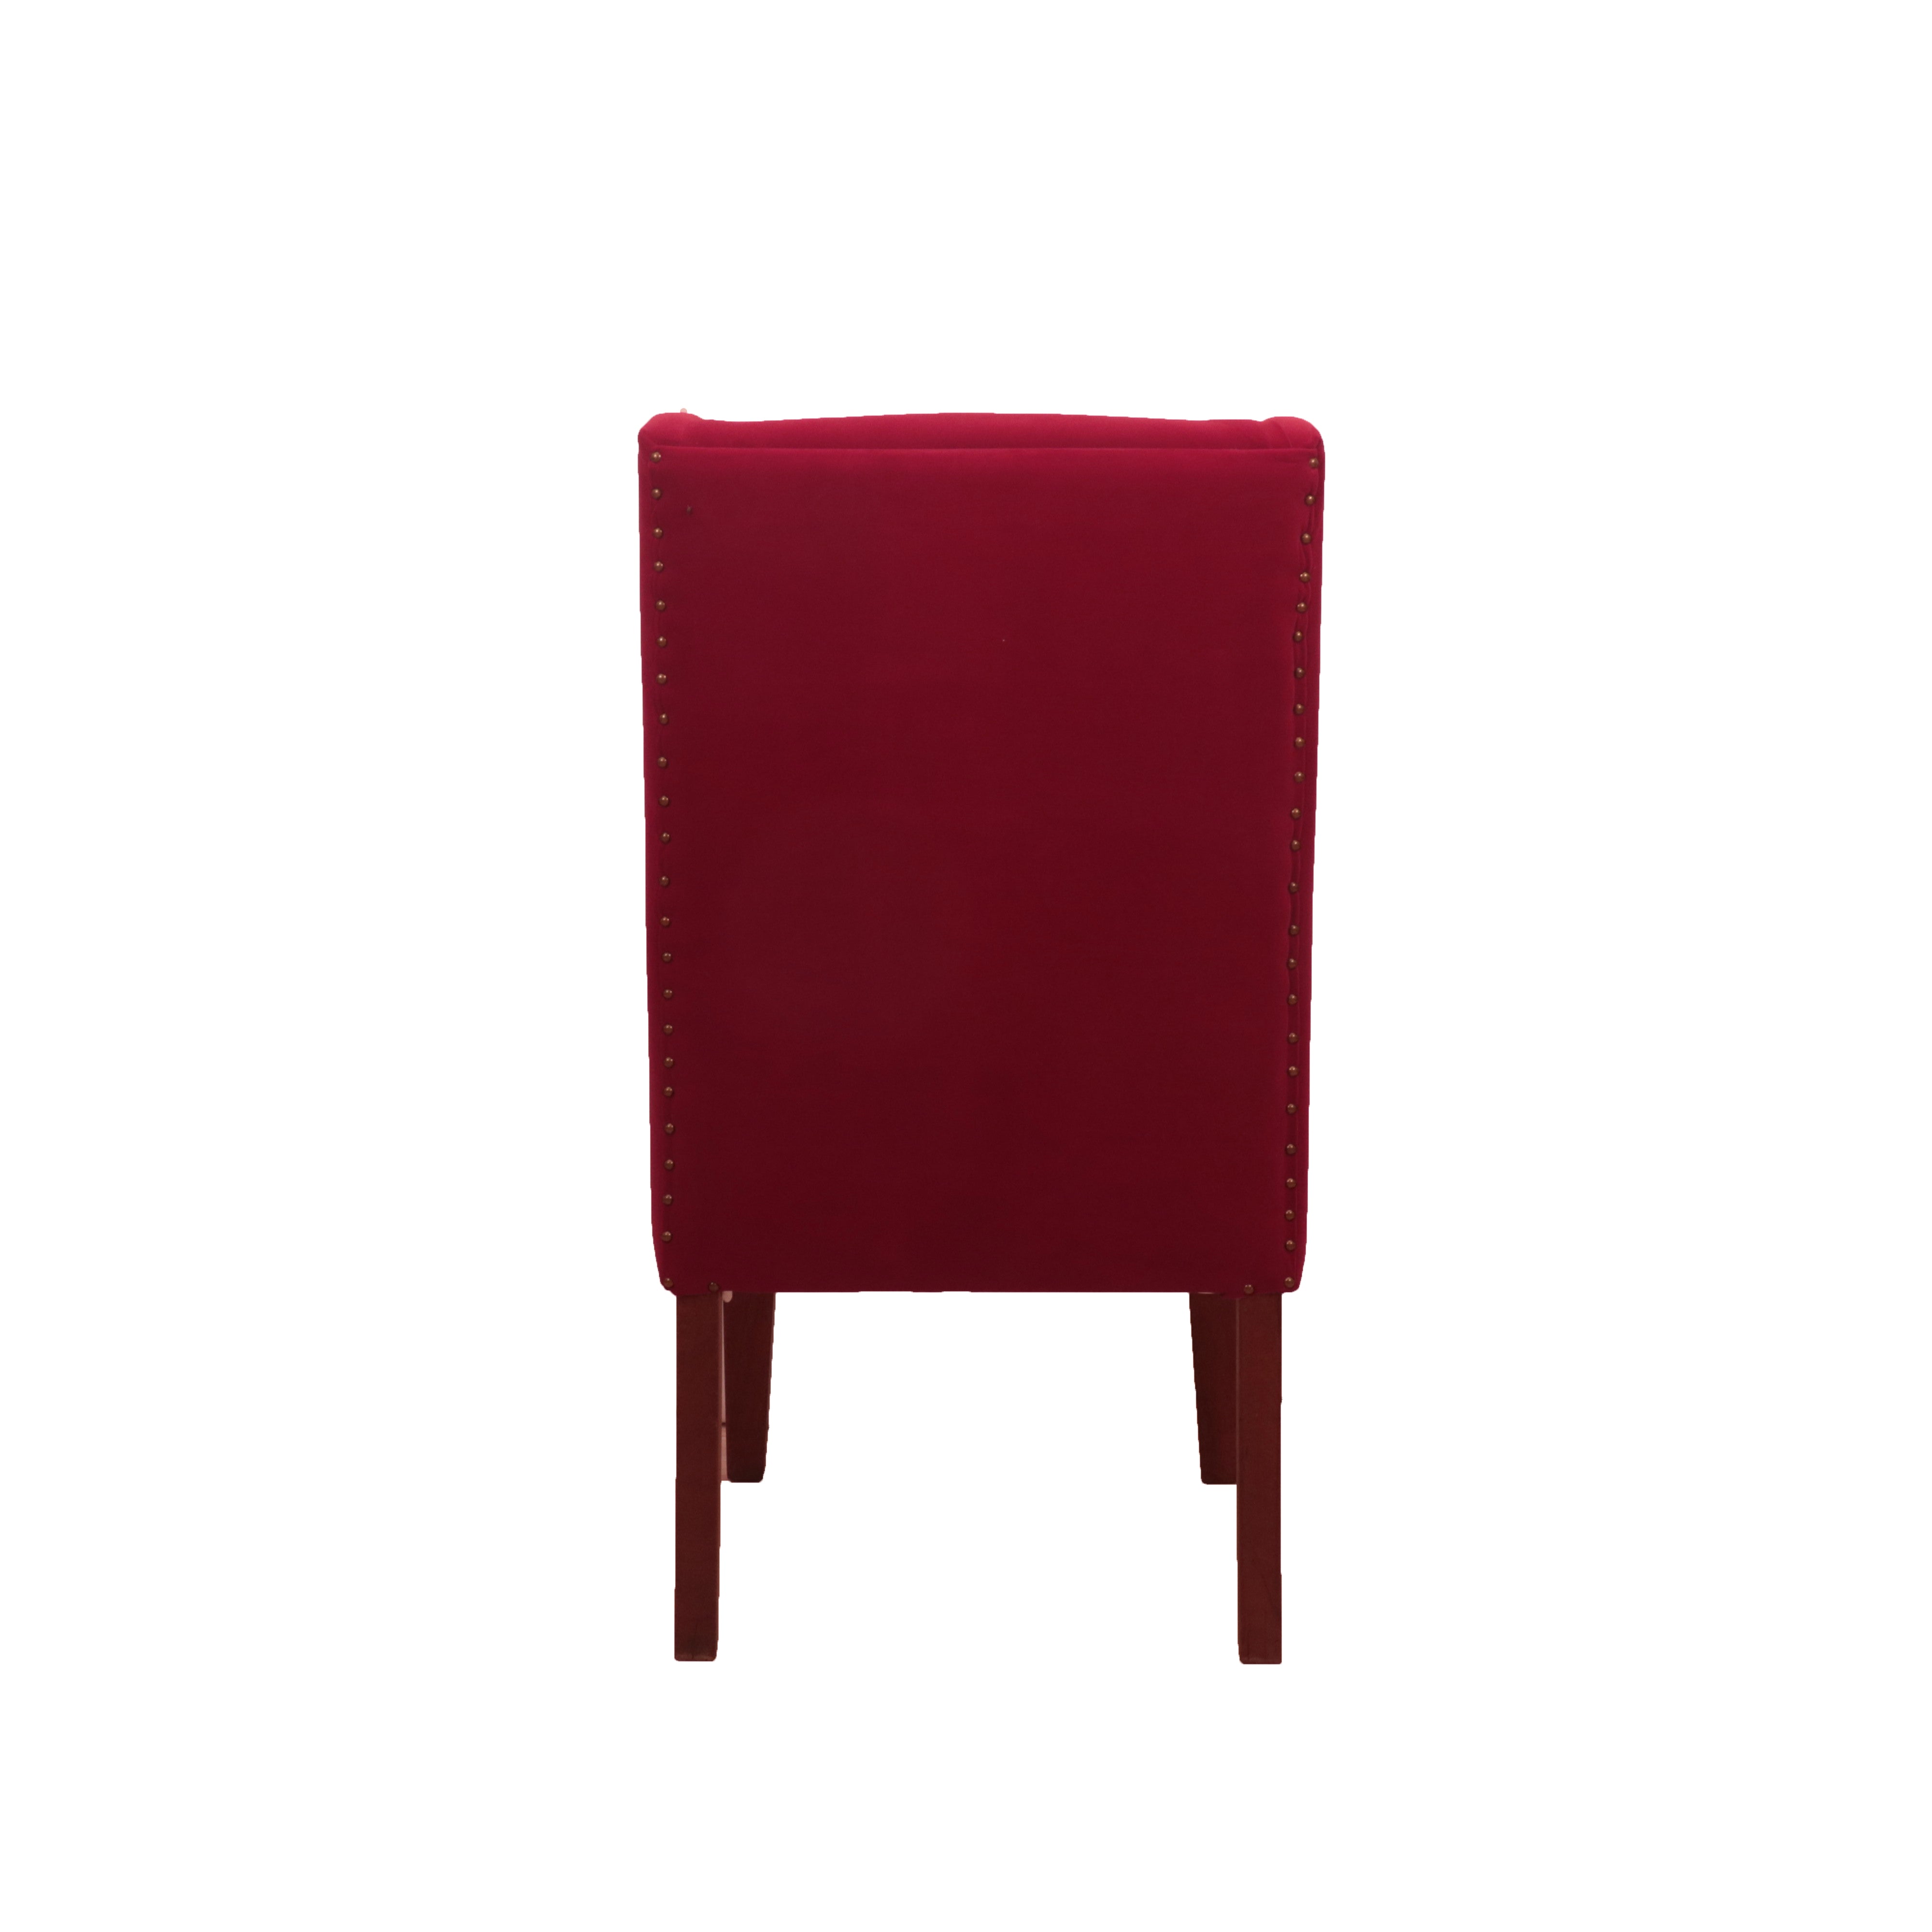 Bright Red Winged Chair Arm Chair